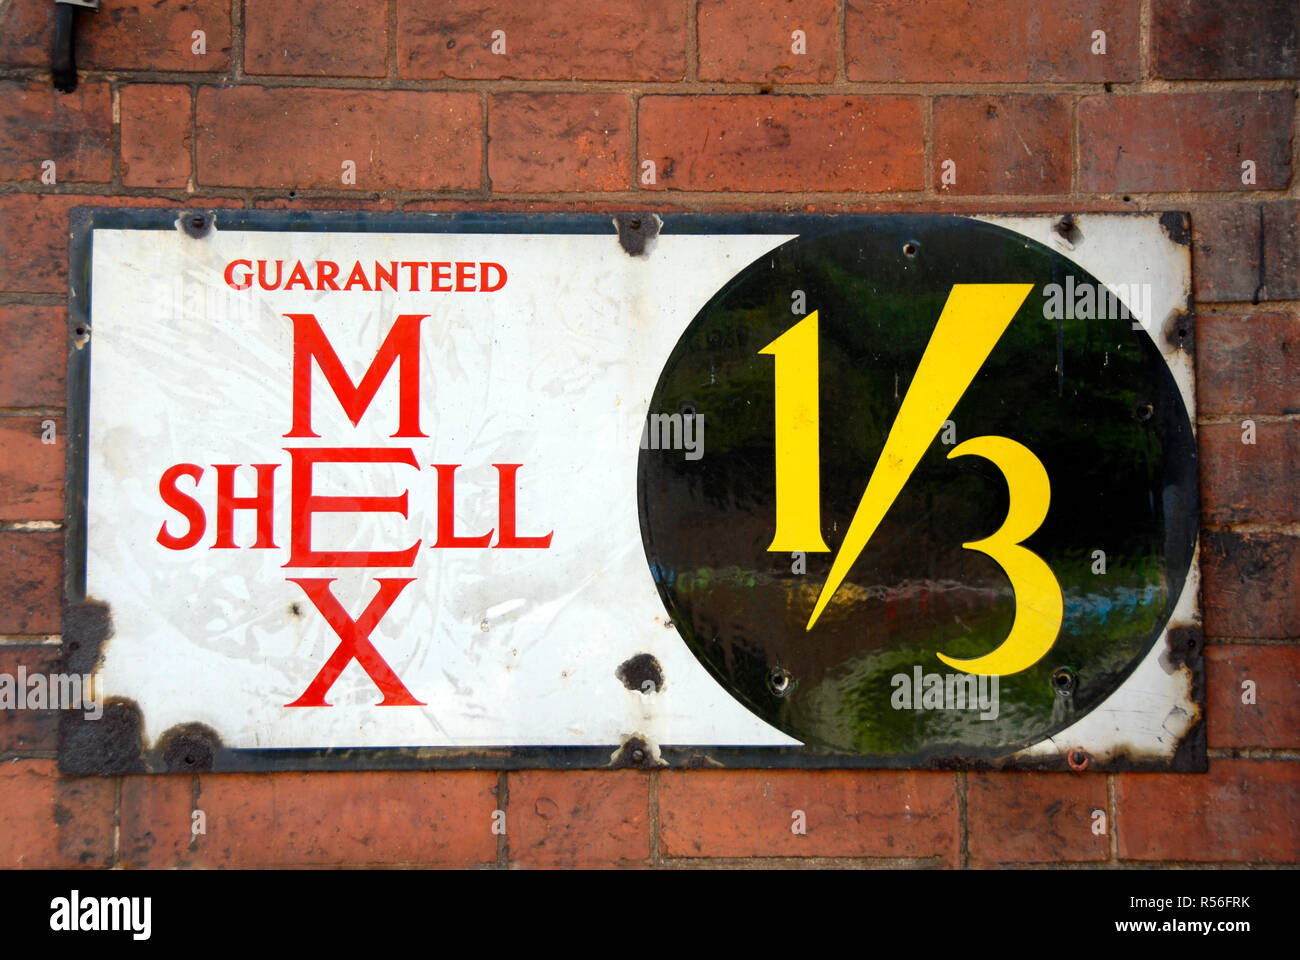 Old metal advertising panel for Shell Mex, fixed to brick wall, at a time when gasoline (petrol) was priced at one shilling and three pence per gallon Stock Photo